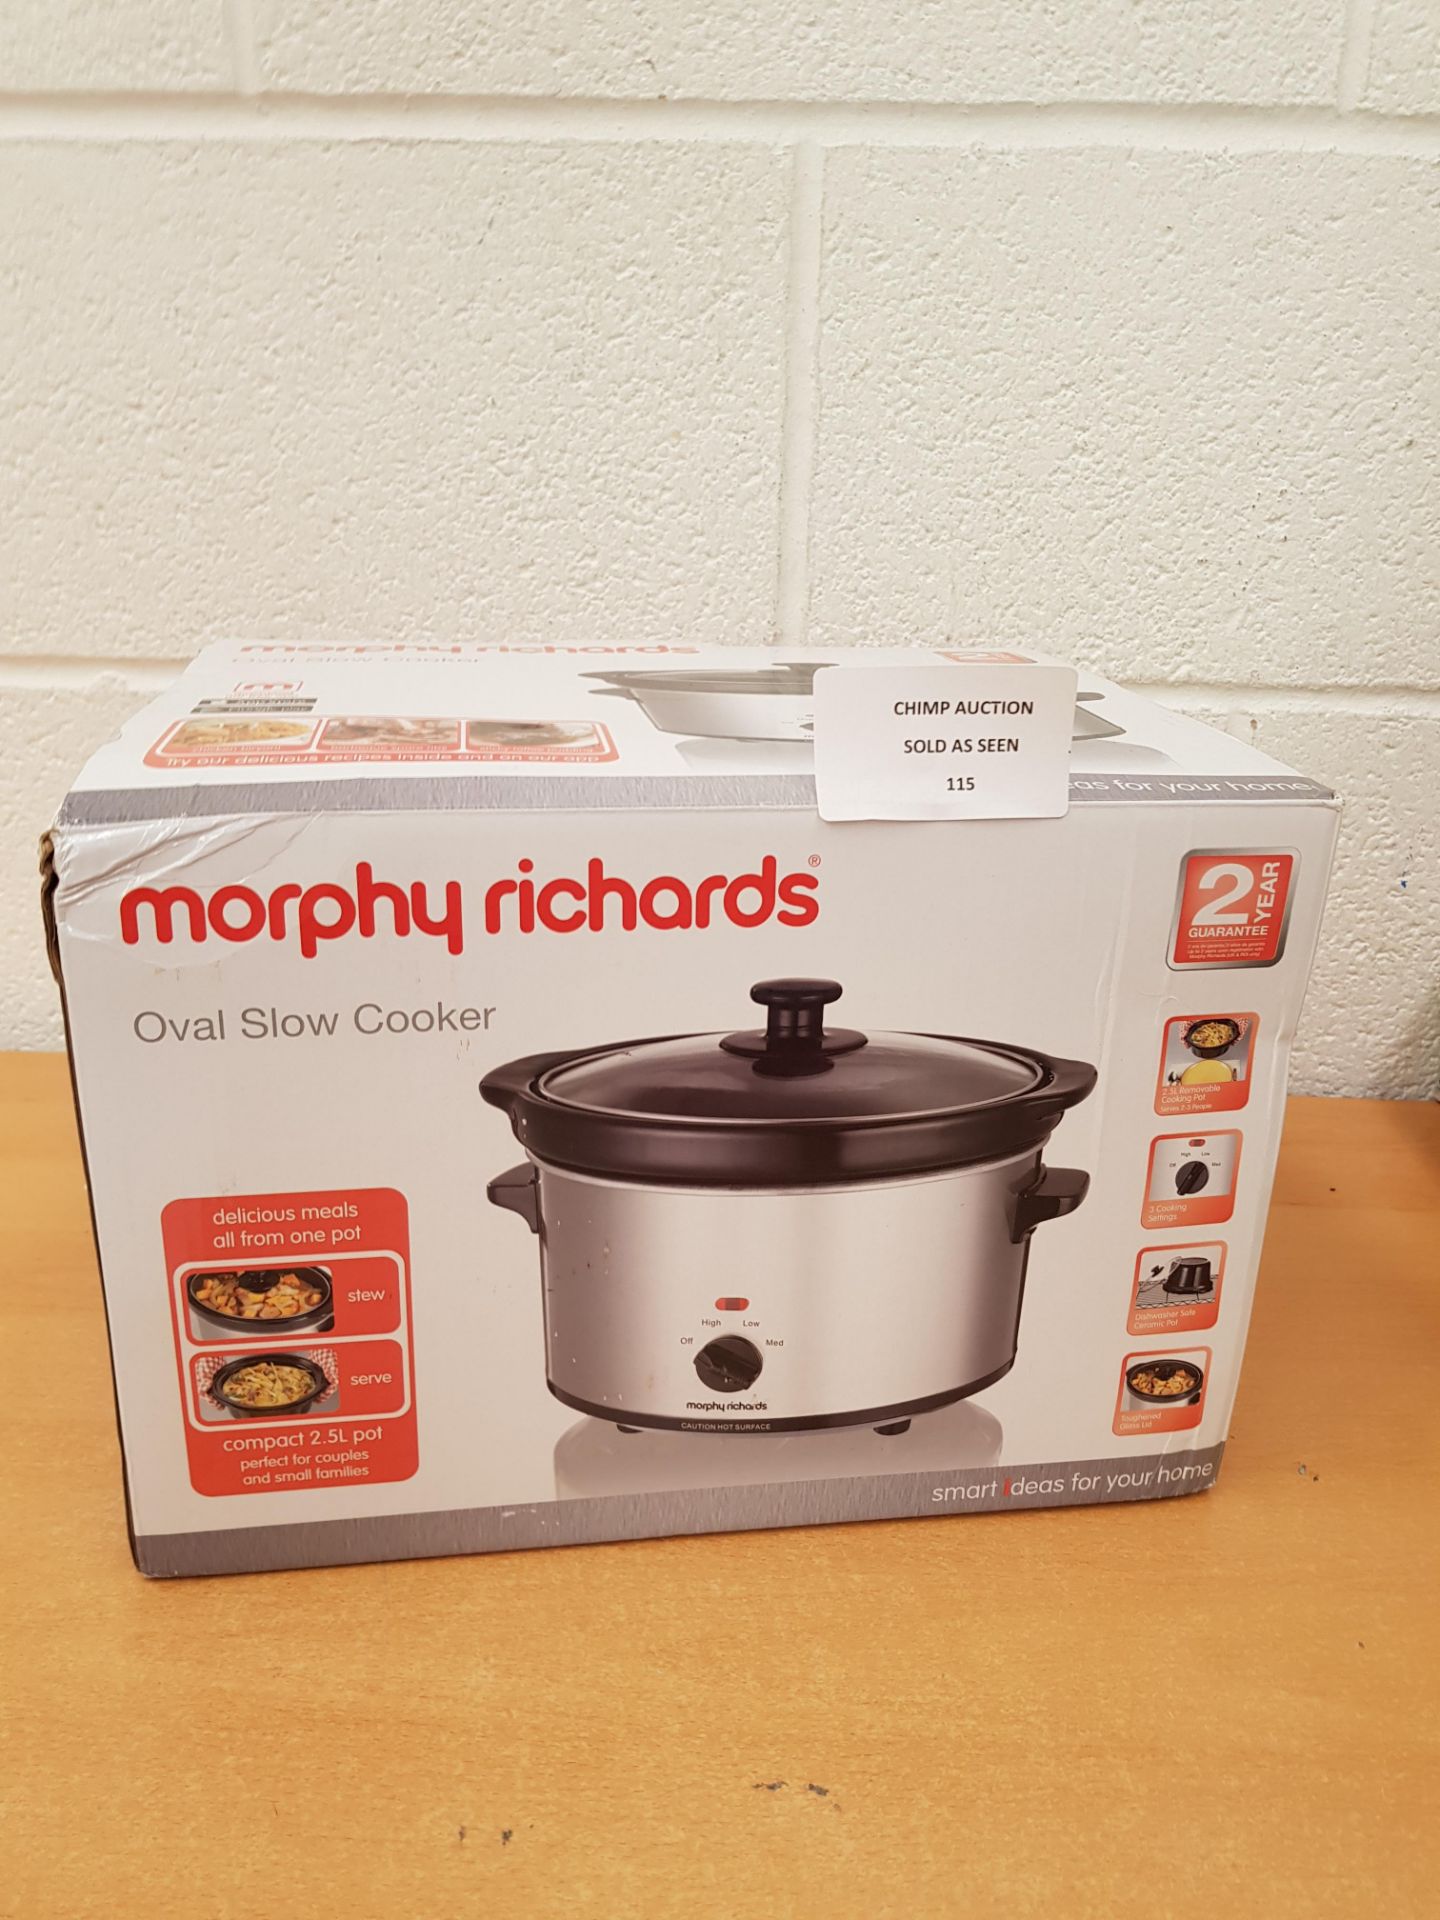 Morphy Richards Oval Slow Cooker